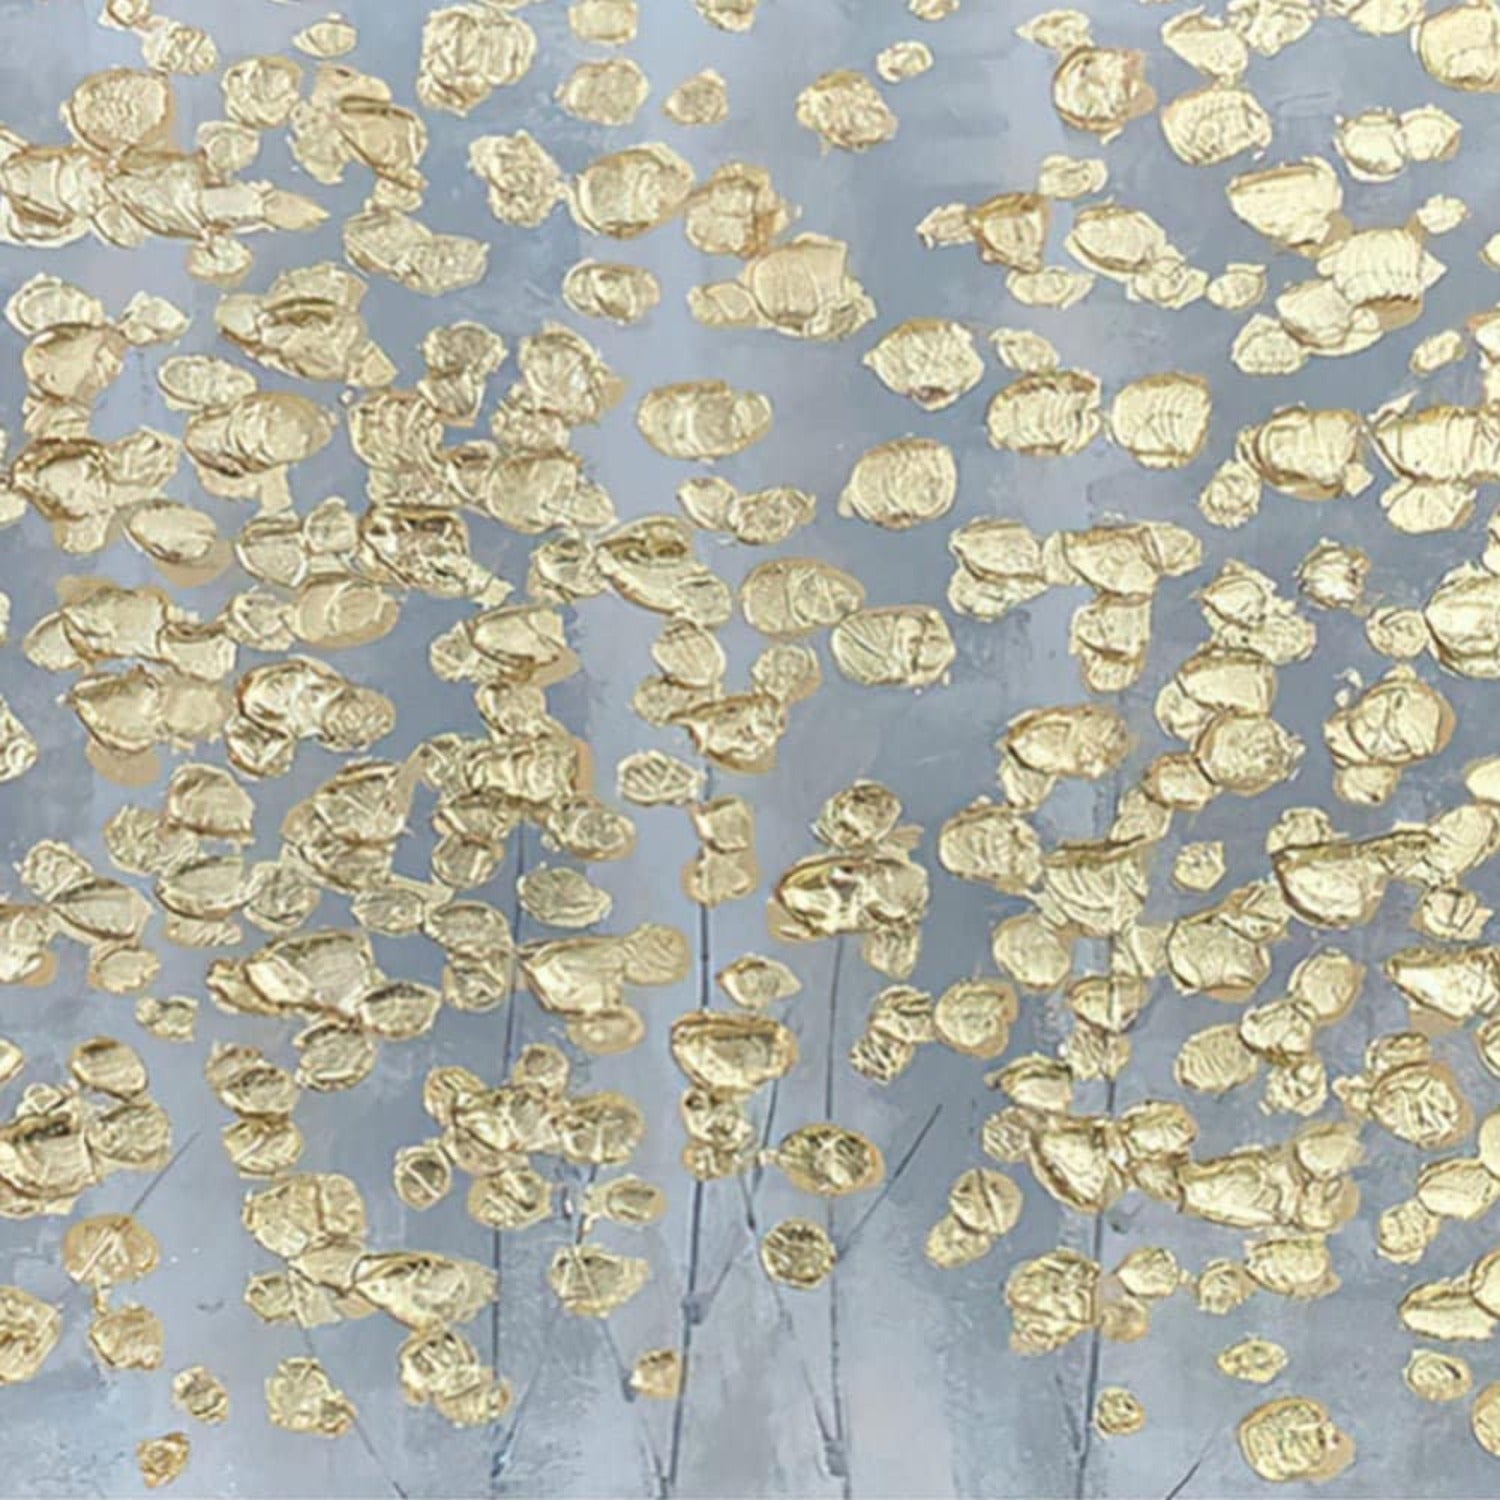 Golden Trees 100% Hand Painted Contemporary Art